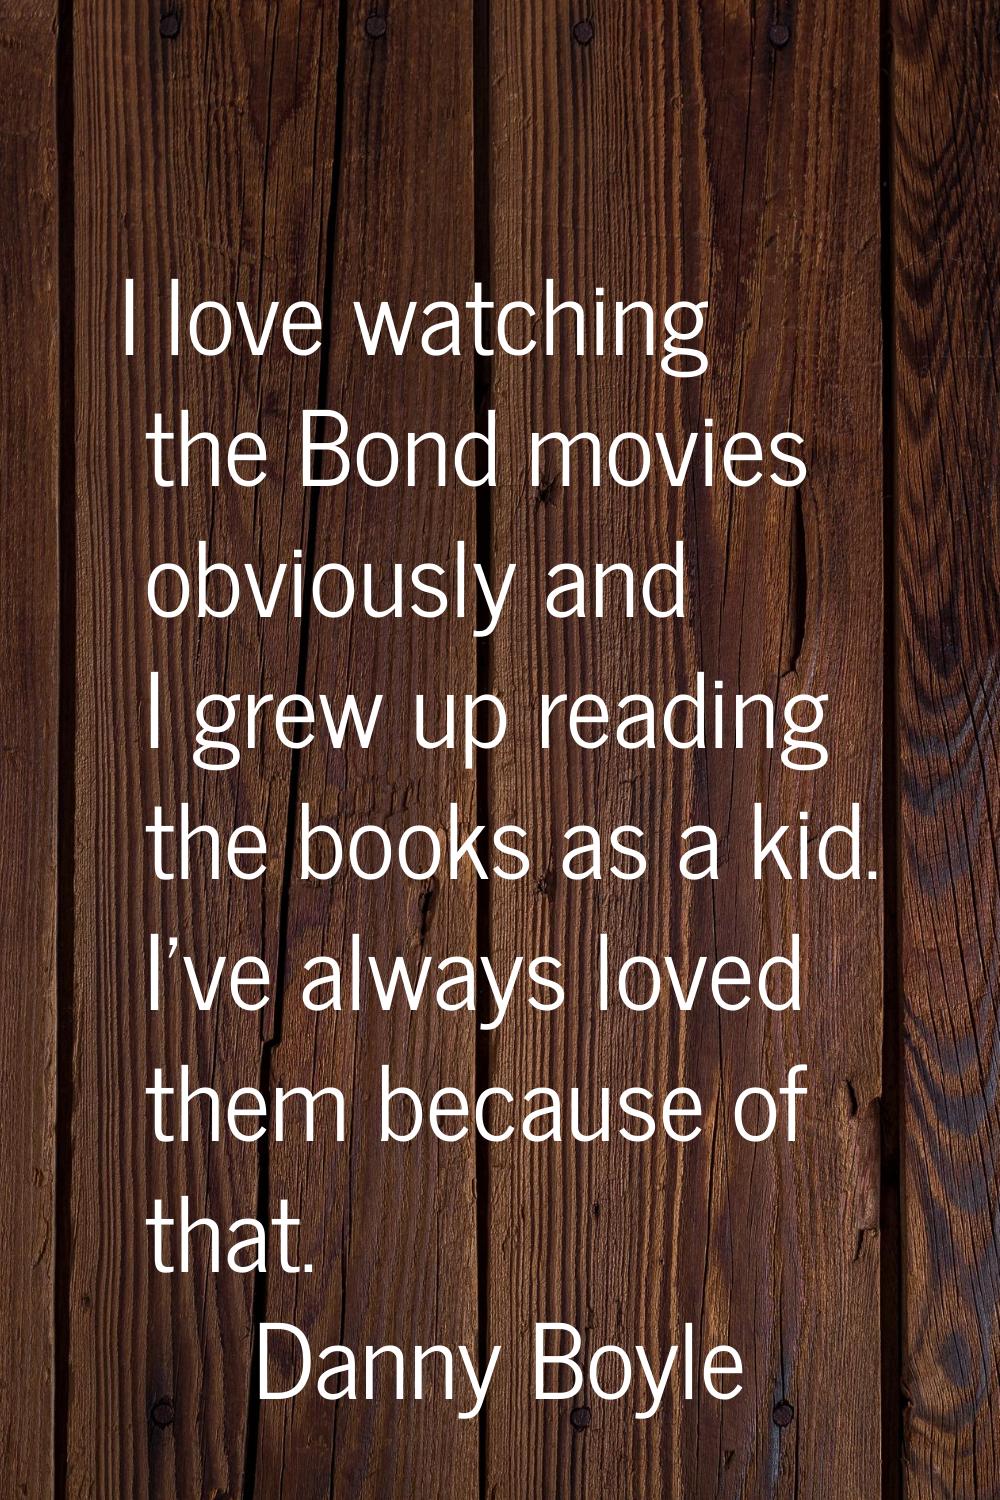 I love watching the Bond movies obviously and I grew up reading the books as a kid. I've always lov